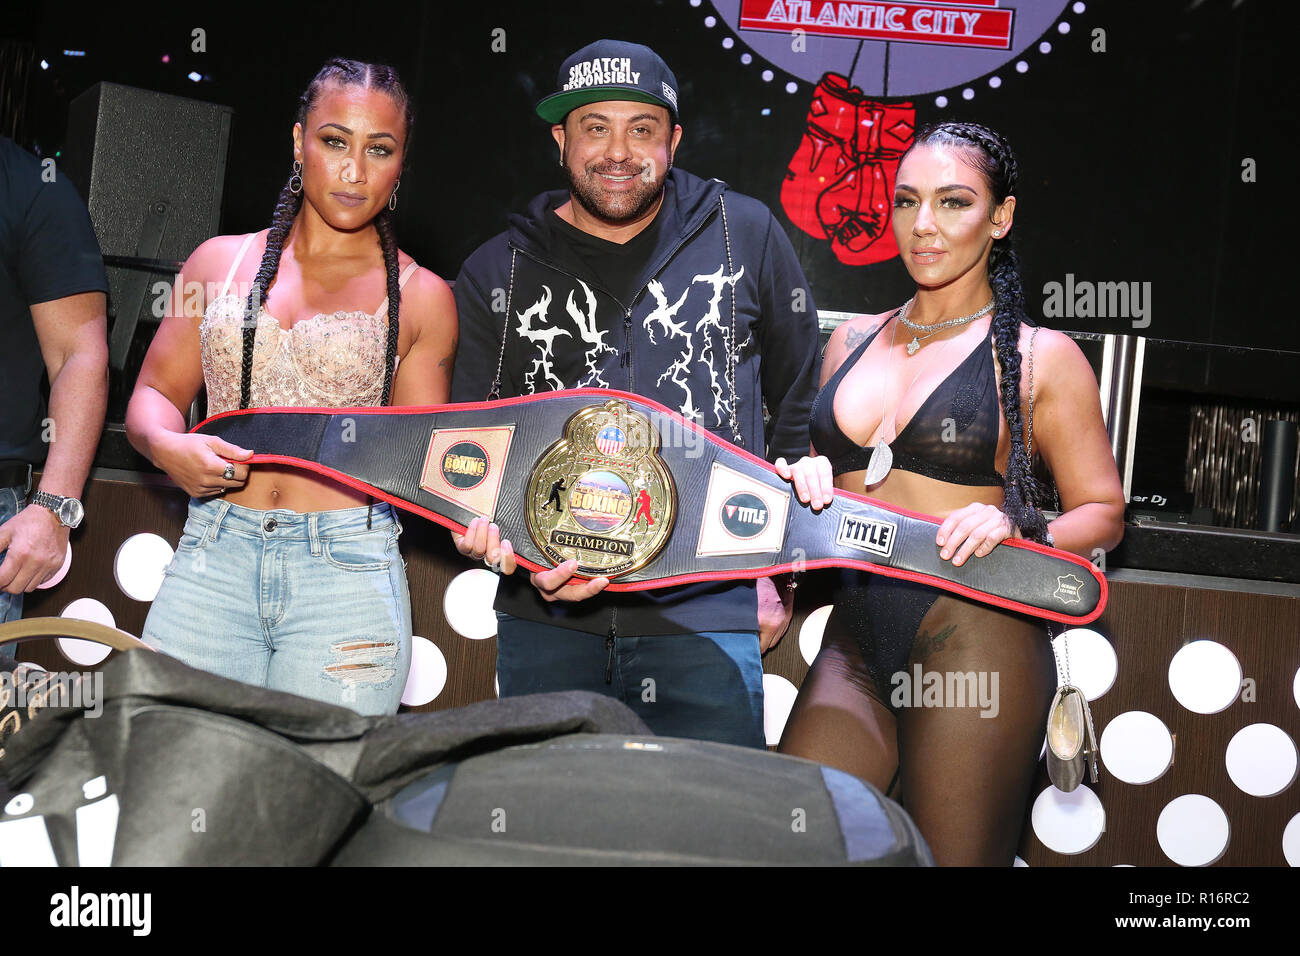 ATLANTIC CITY, NJ NOVEMBER 9 Nicole Hoopz Alexande, DJ Scribble and Natalie DiDonato pictured at the press conference for Celebrity Boxing Match at the Golden Nugget, being held on November 10